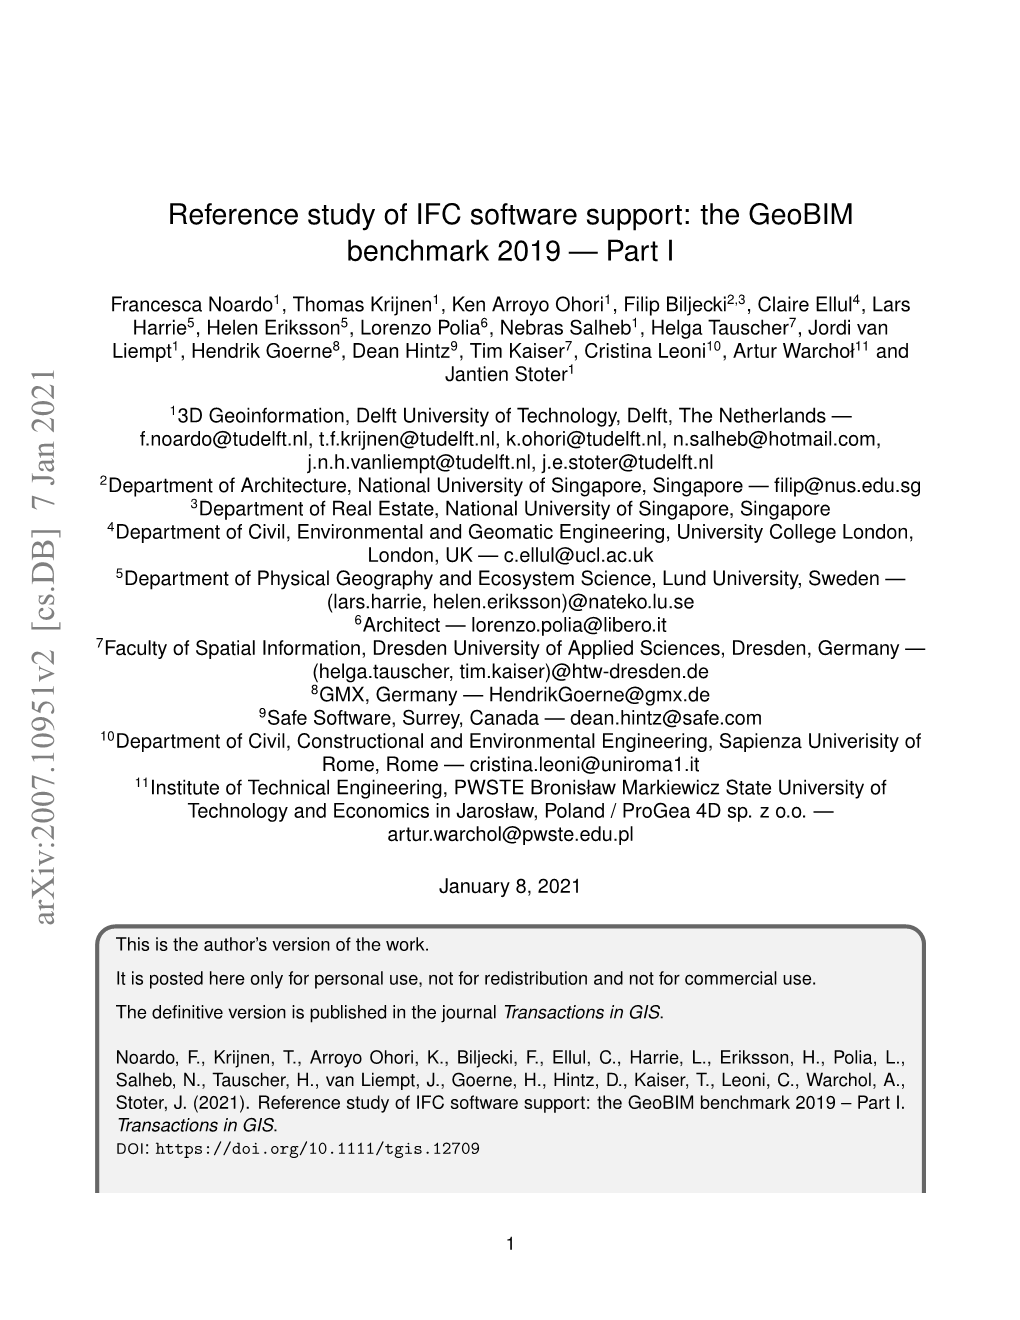 Reference Study of IFC Software Support: the Geobim Benchmark 2019 — Part I